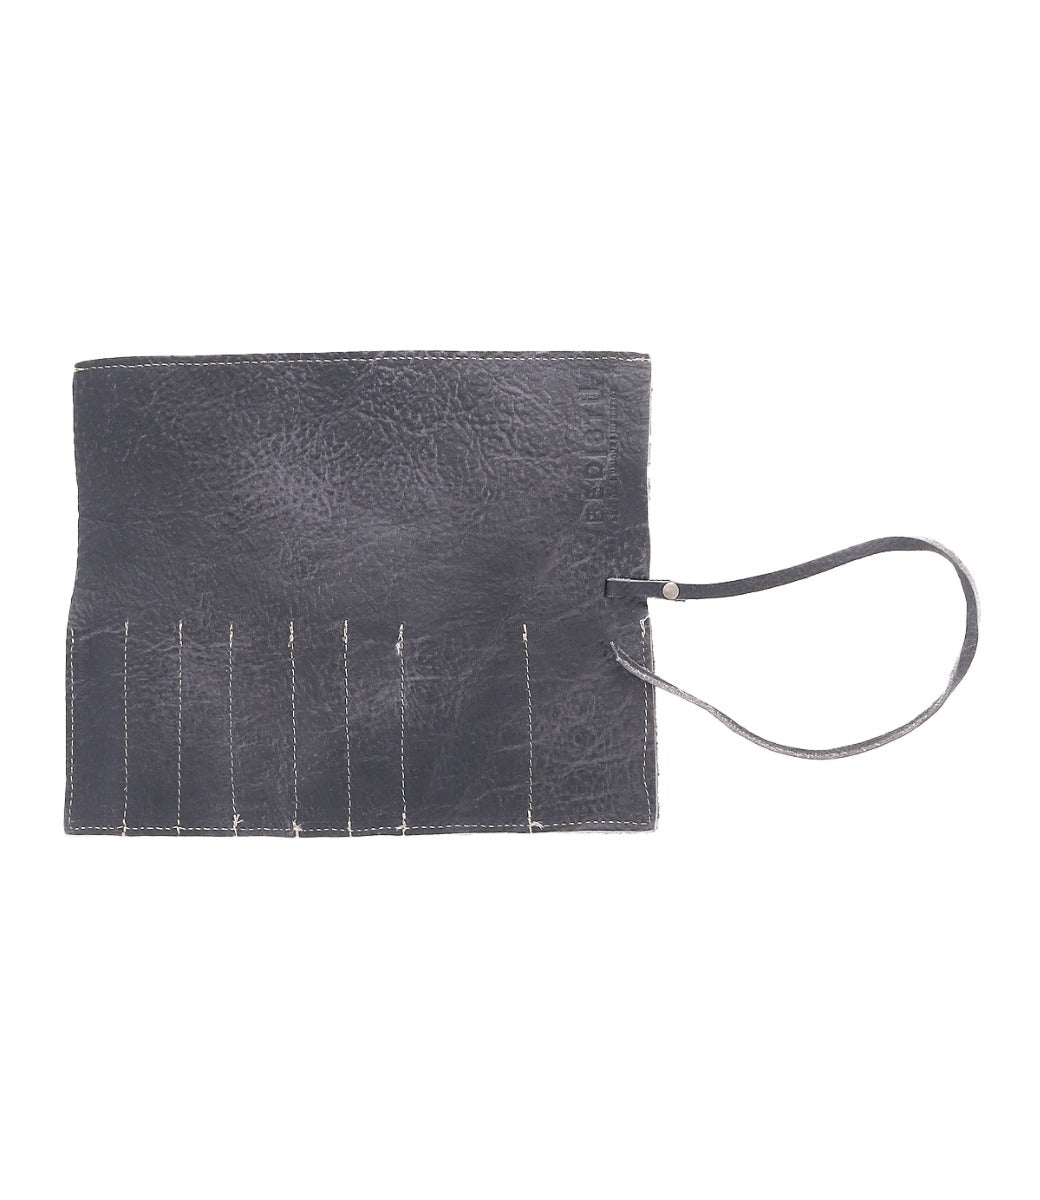 A Prepped black leather clutch with metal pins on it by Bed Stu.